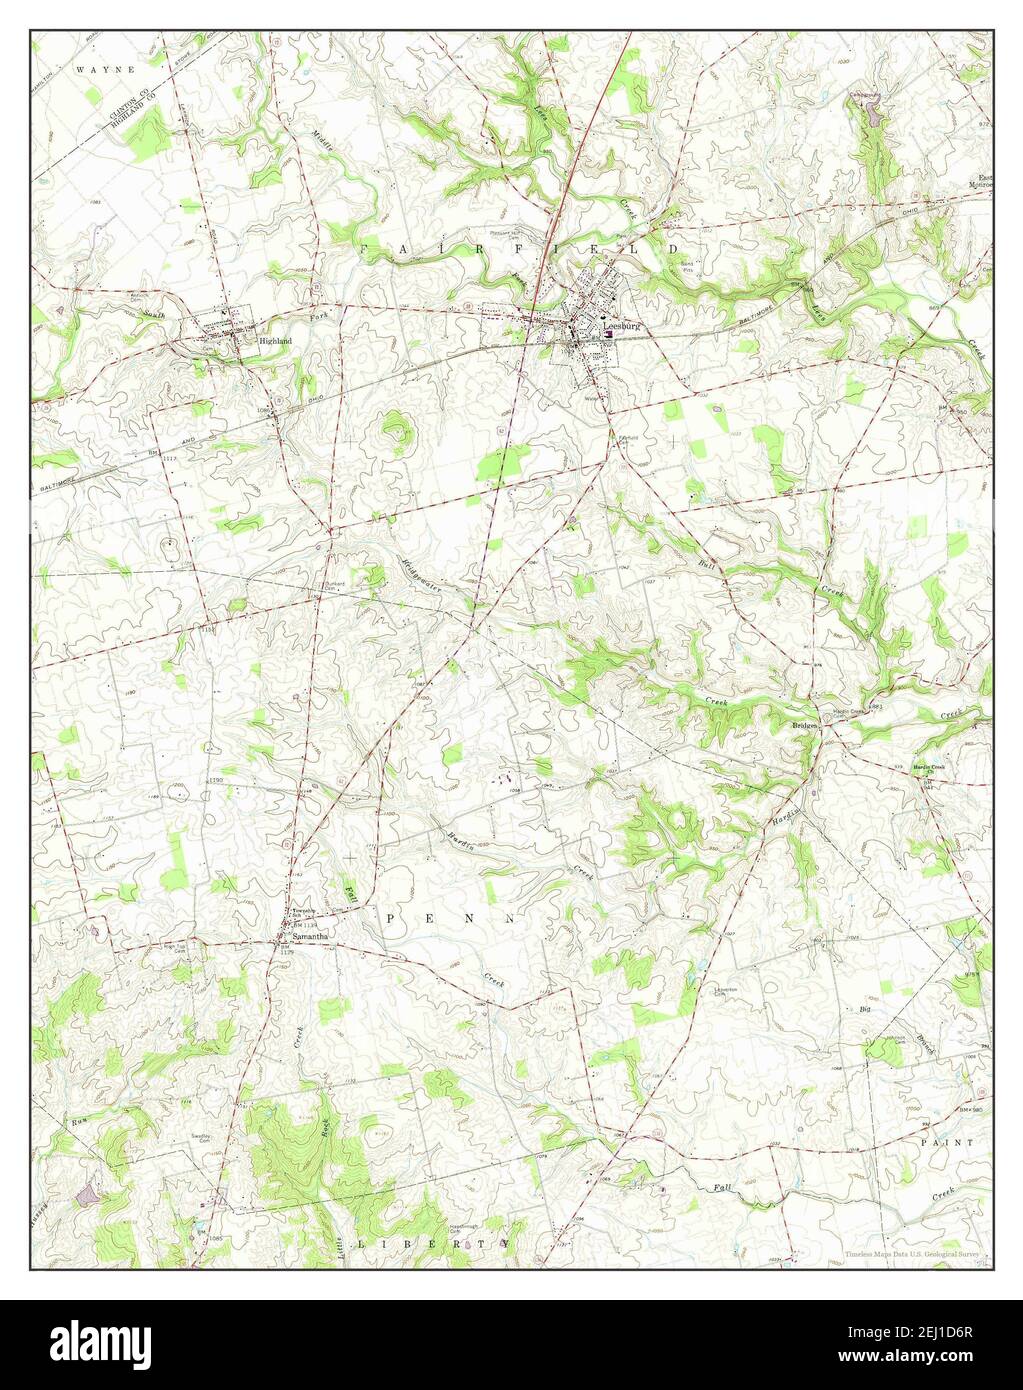 Leesburg, Ohio, map 1960, 1:24000, United States of America by Timeless Maps, data U.S. Geological Survey Stock Photo